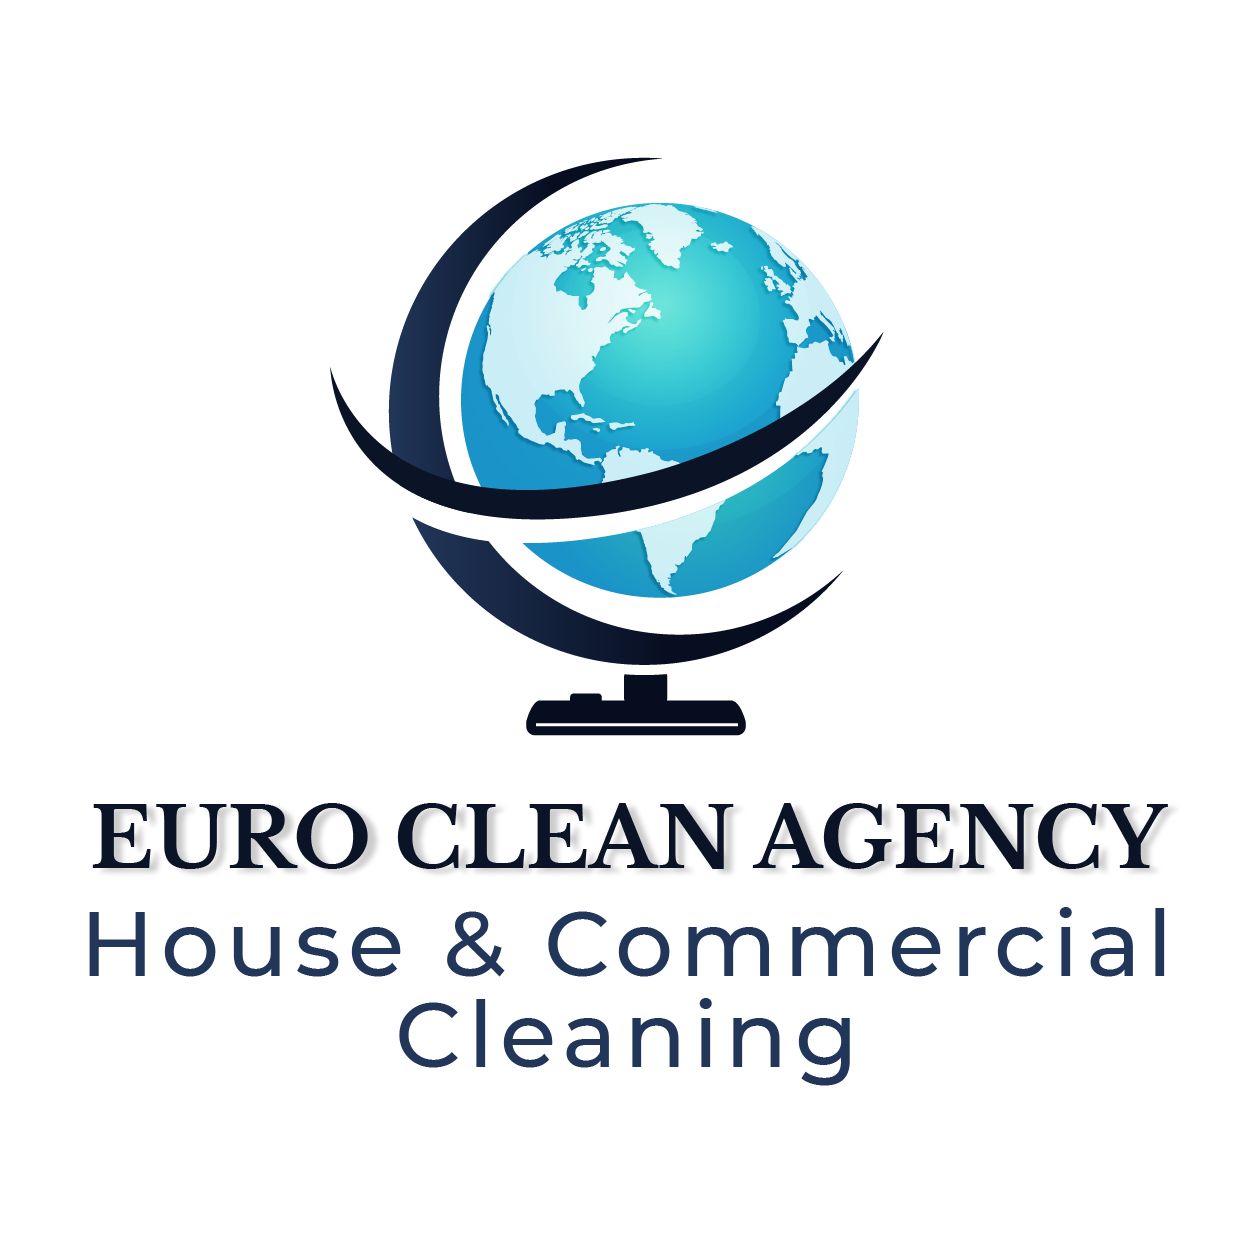 Euro Clean Agency - House & Commercial Cleaning